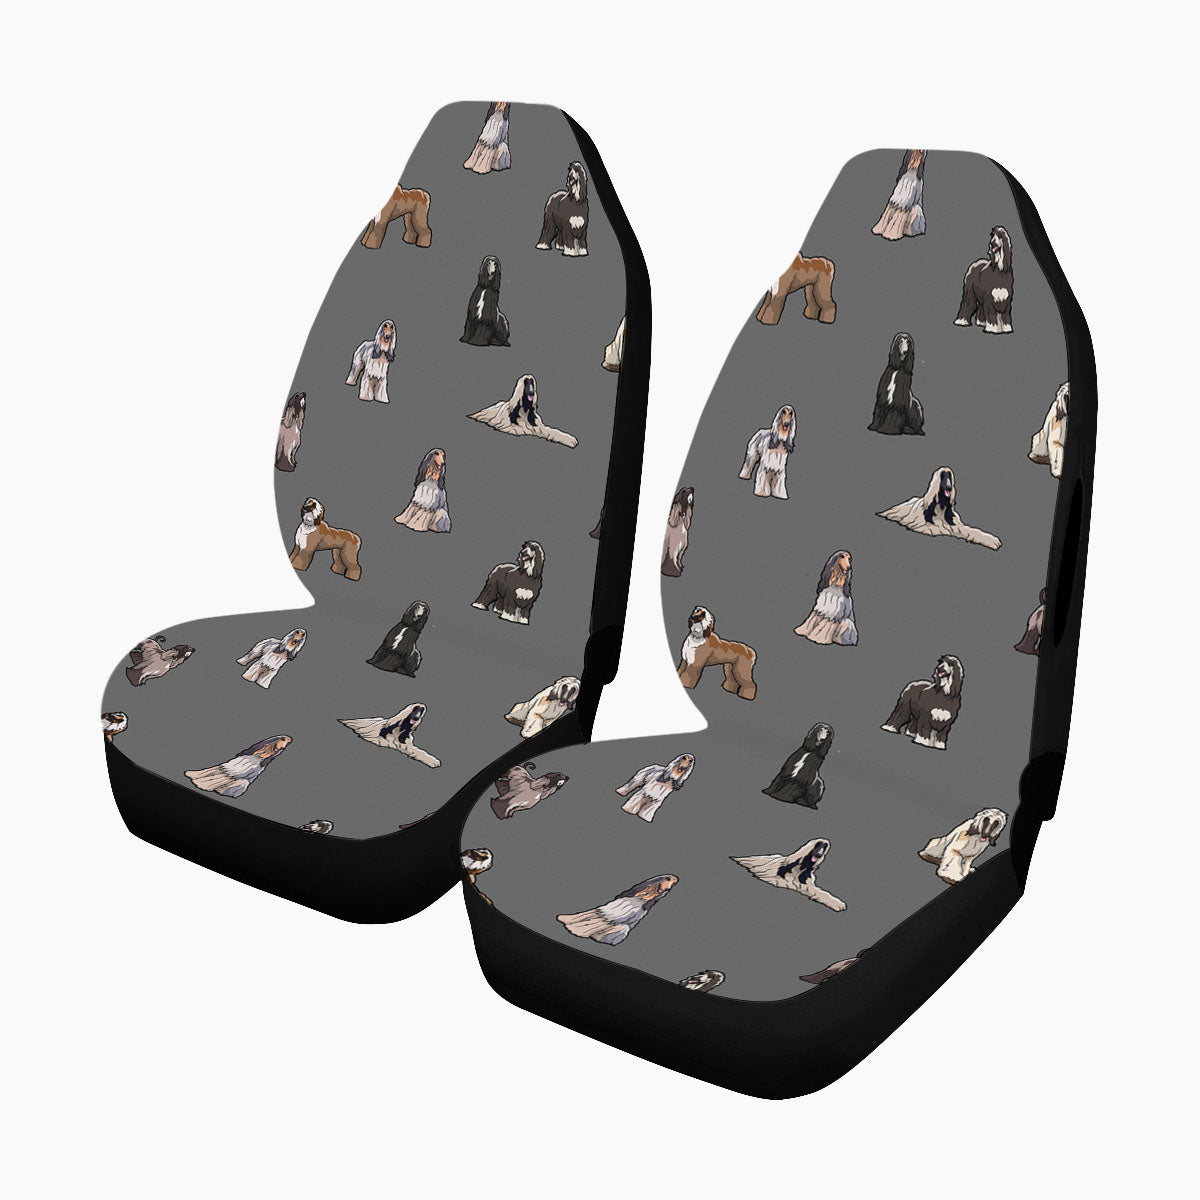 Afghan Hound - Pair of Car Seat Covers